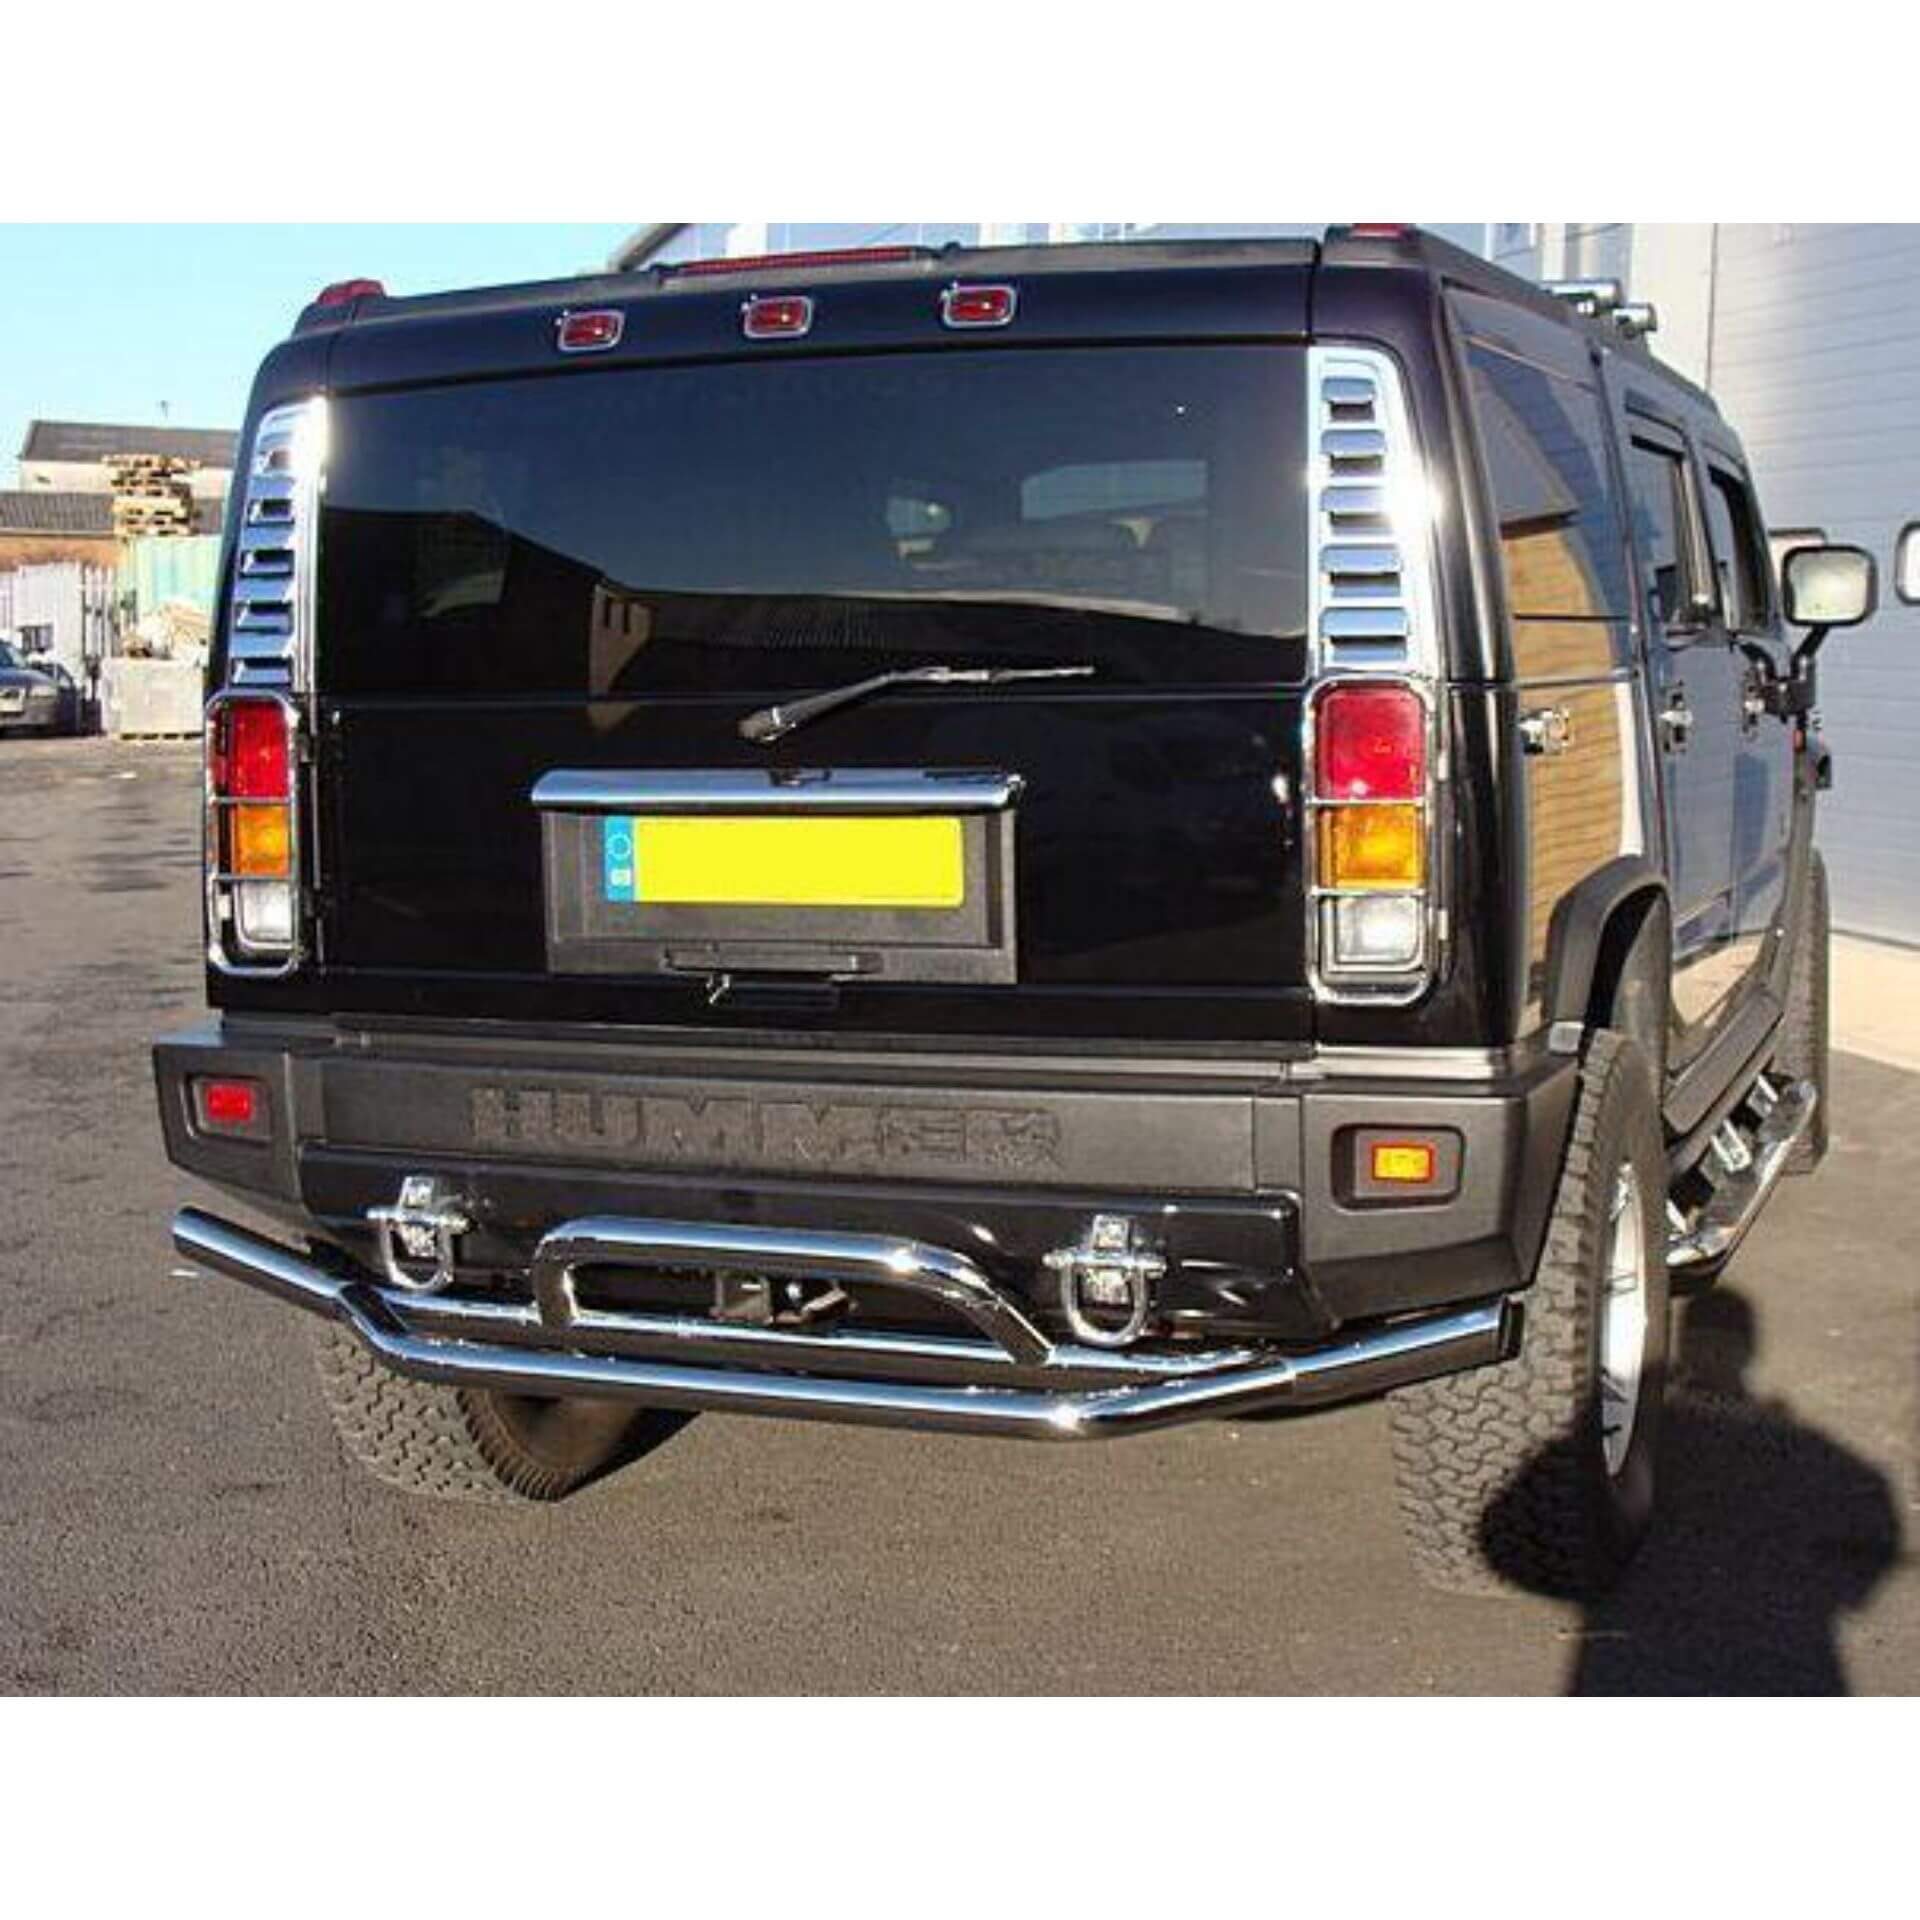 Stainless Steel Rear Tail Light Guards for Hummer H2 -  - sold by Direct4x4